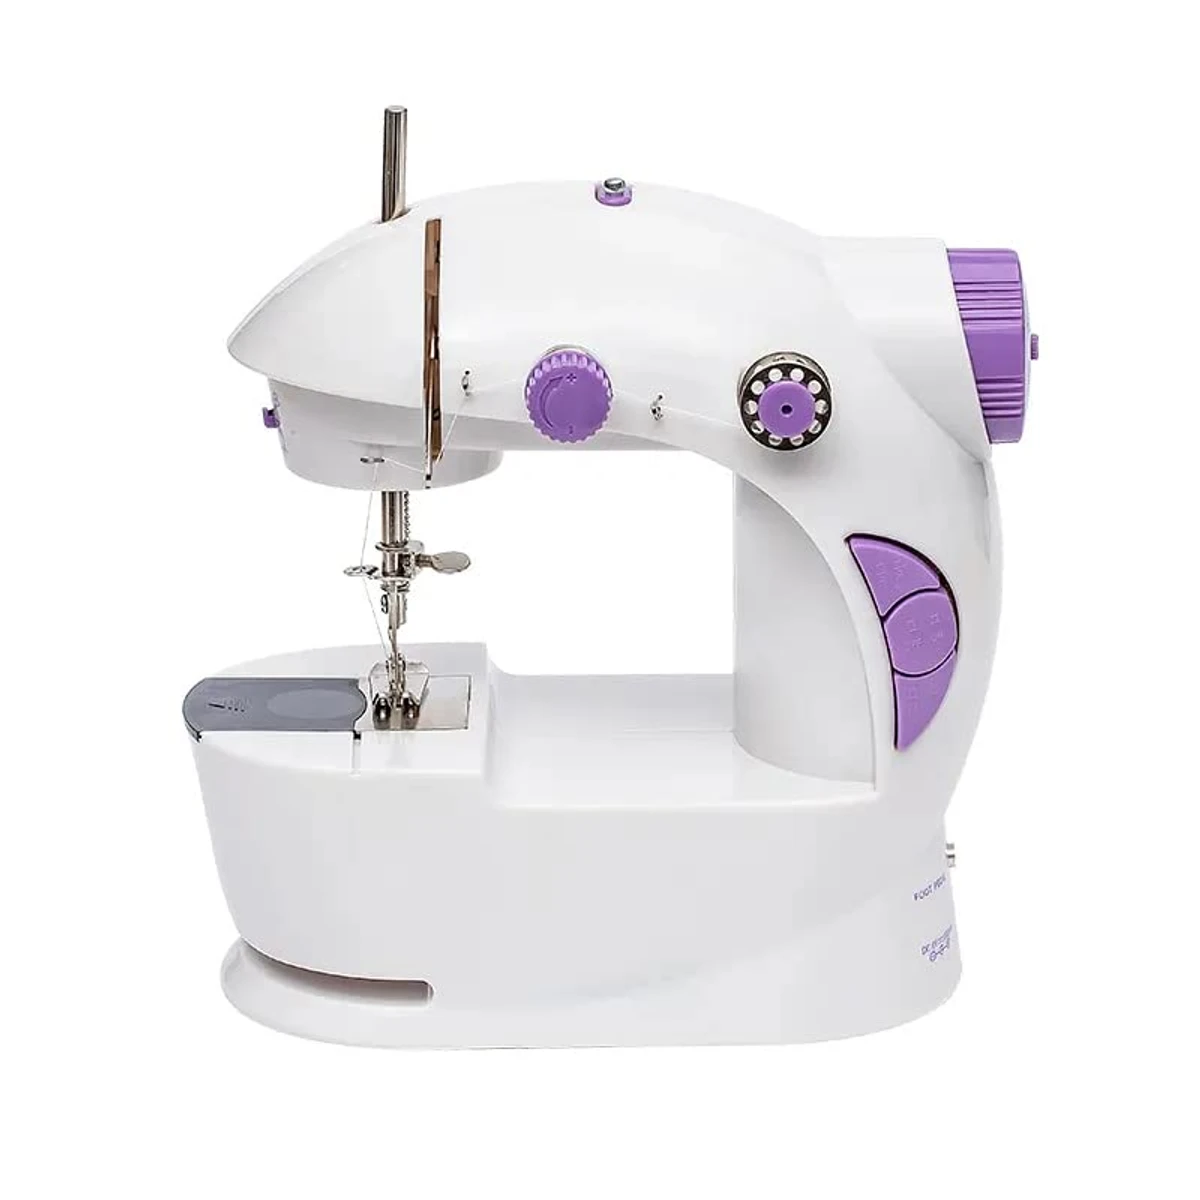 Mini Sewing Machine | Tailoring Machine | Hand Sewing Machine With Foot Pedal, Adapter